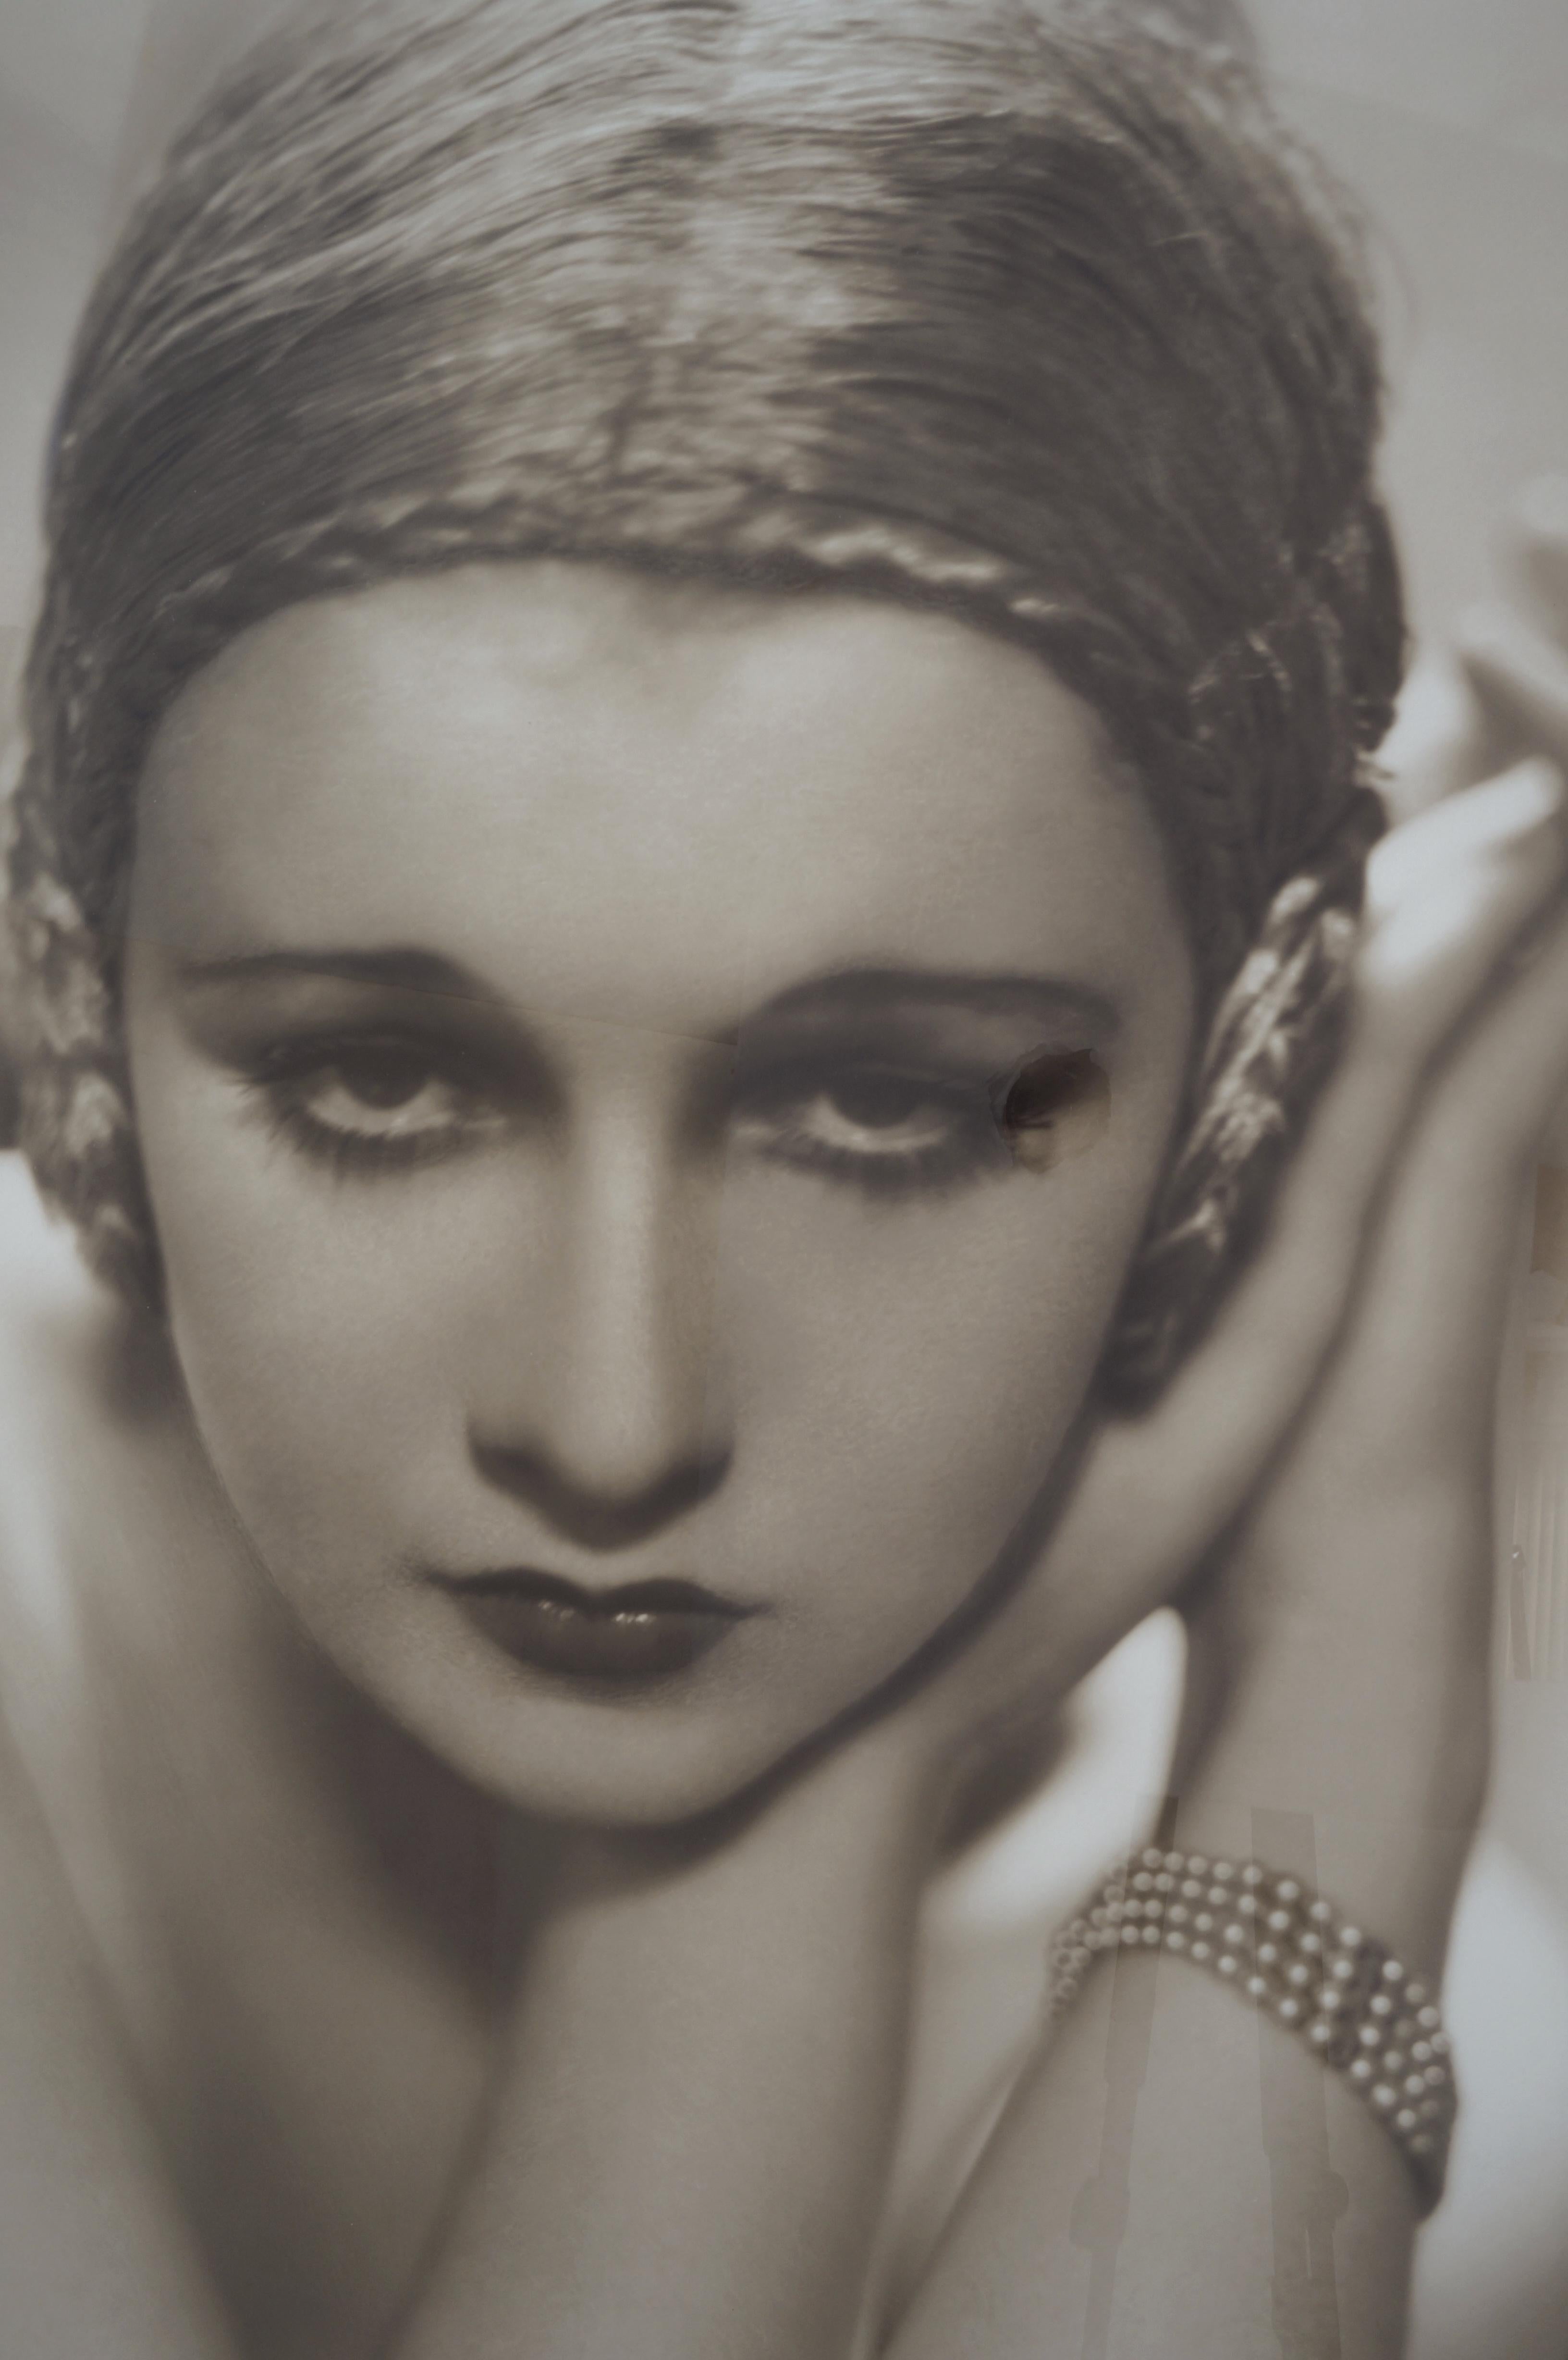 This stylish and chic photograpy of Anita Paig was originally taken in 1930 by George Hurrell.

This piece is from George Hurrels Top Fifty collection, and the original negative were restored thus allowing to create this size digital reprints from